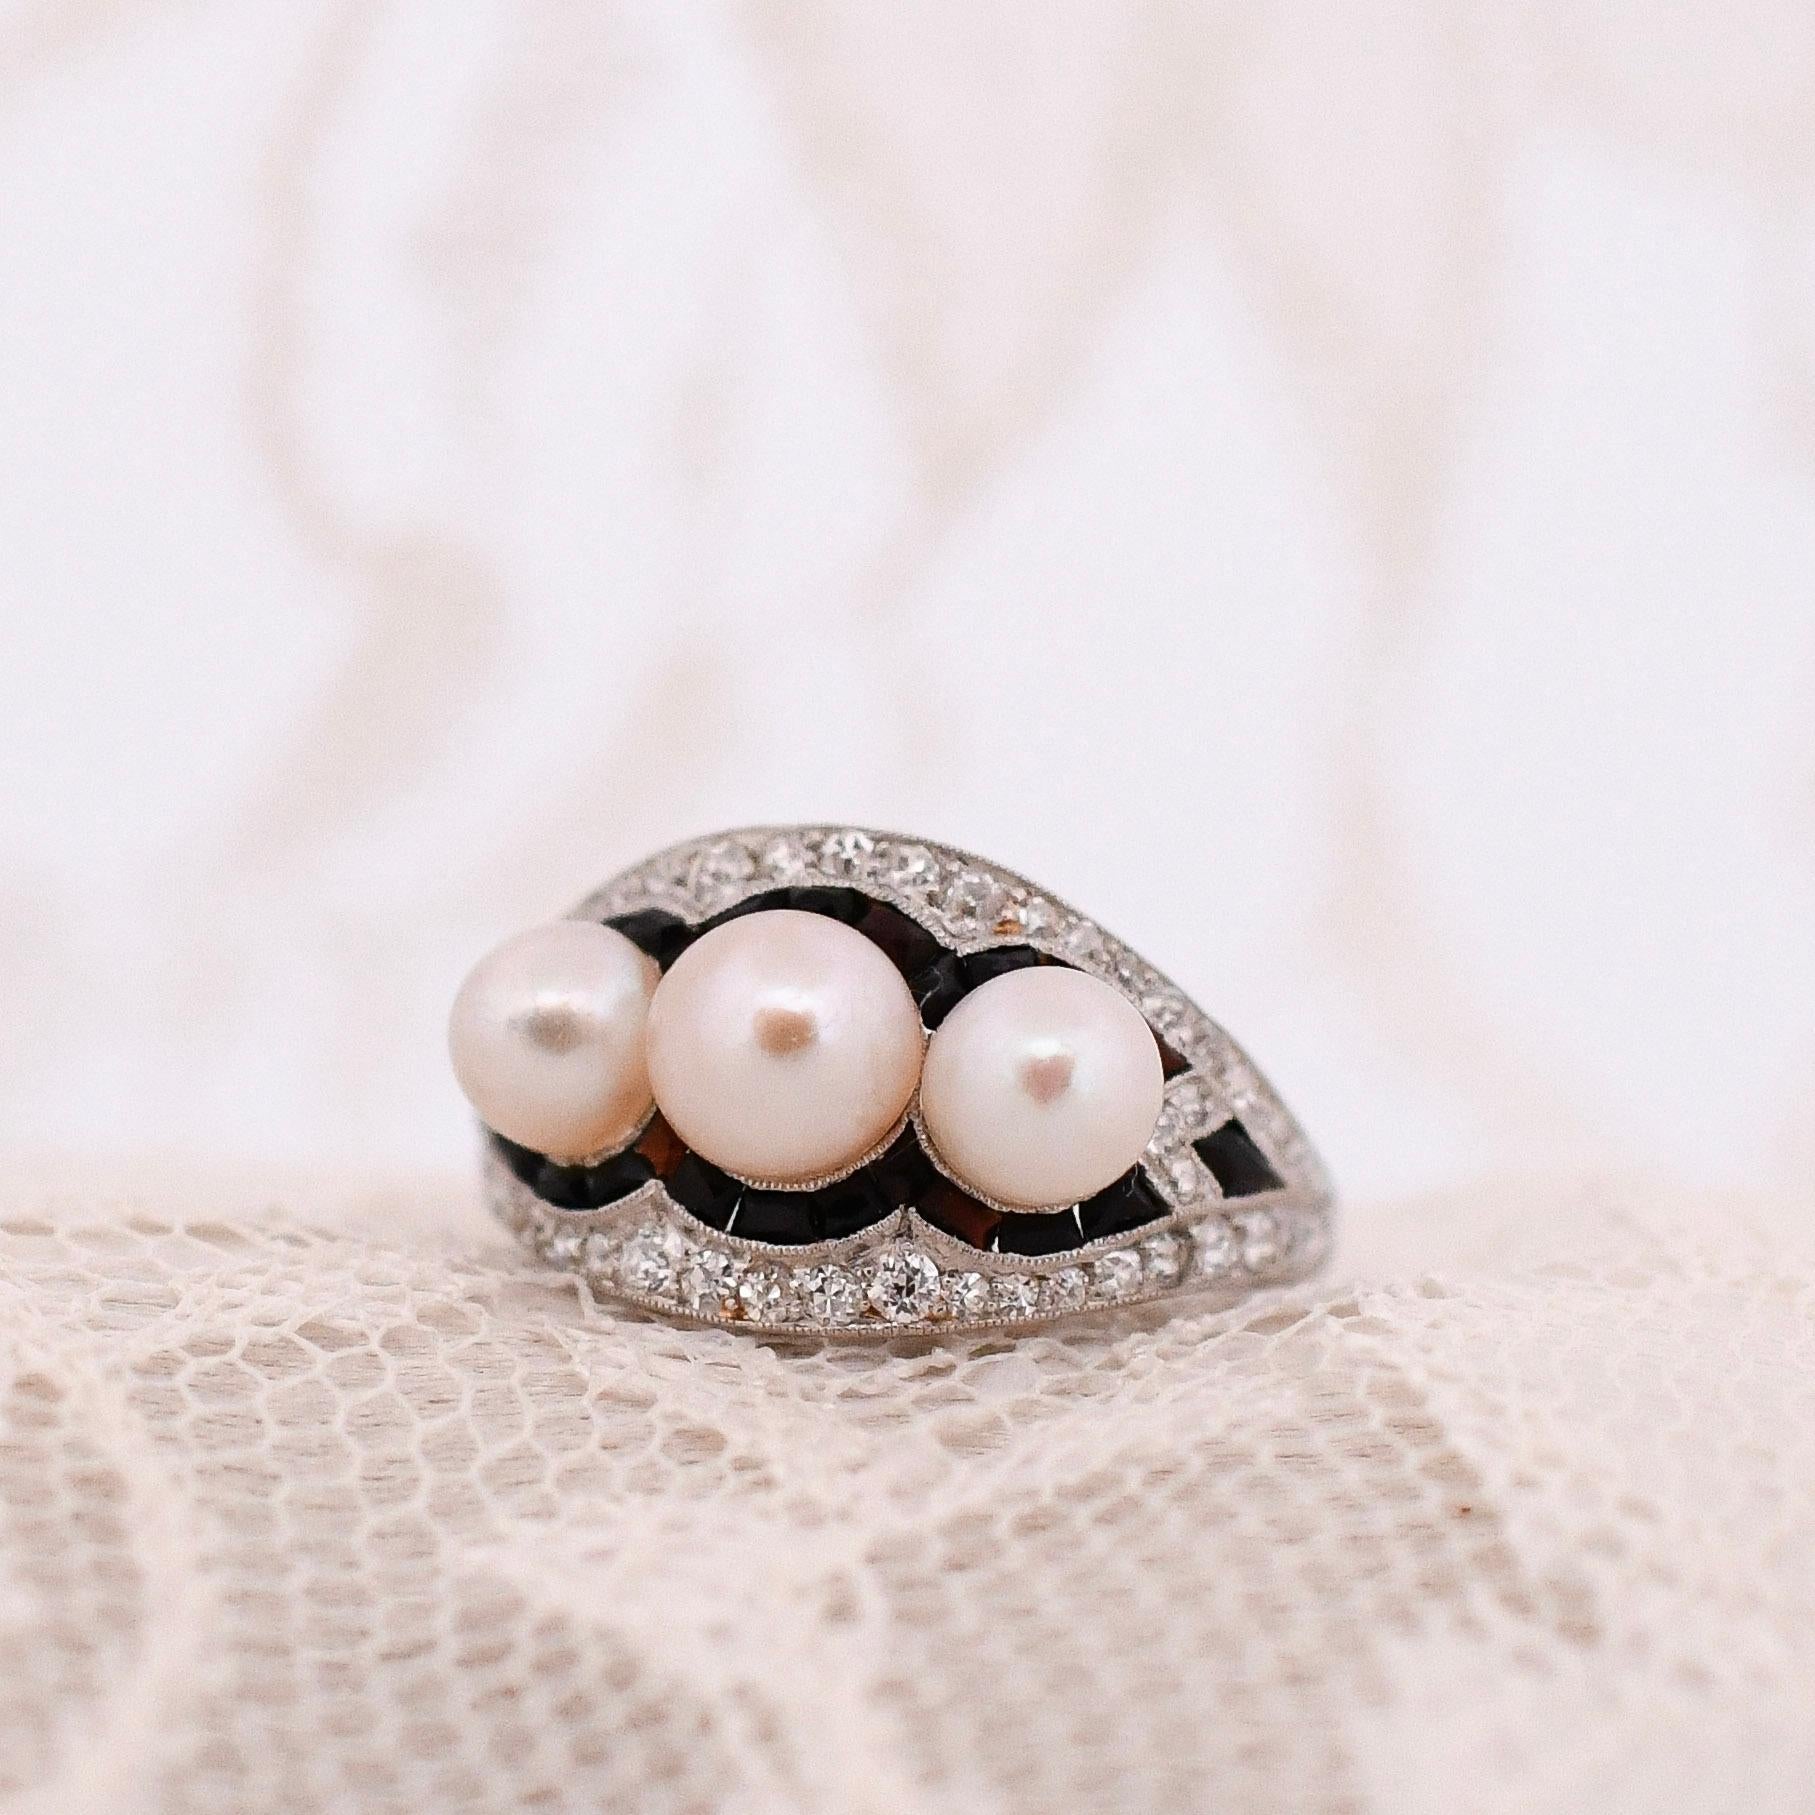 Step into the glamour of the Art Deco period with this exquisite platinum band ring. Adorned with three lustrous pearls that exude timeless elegance, the ring is accentuated by a dazzling diamond and onyx arrangement, creating a captivating contrast